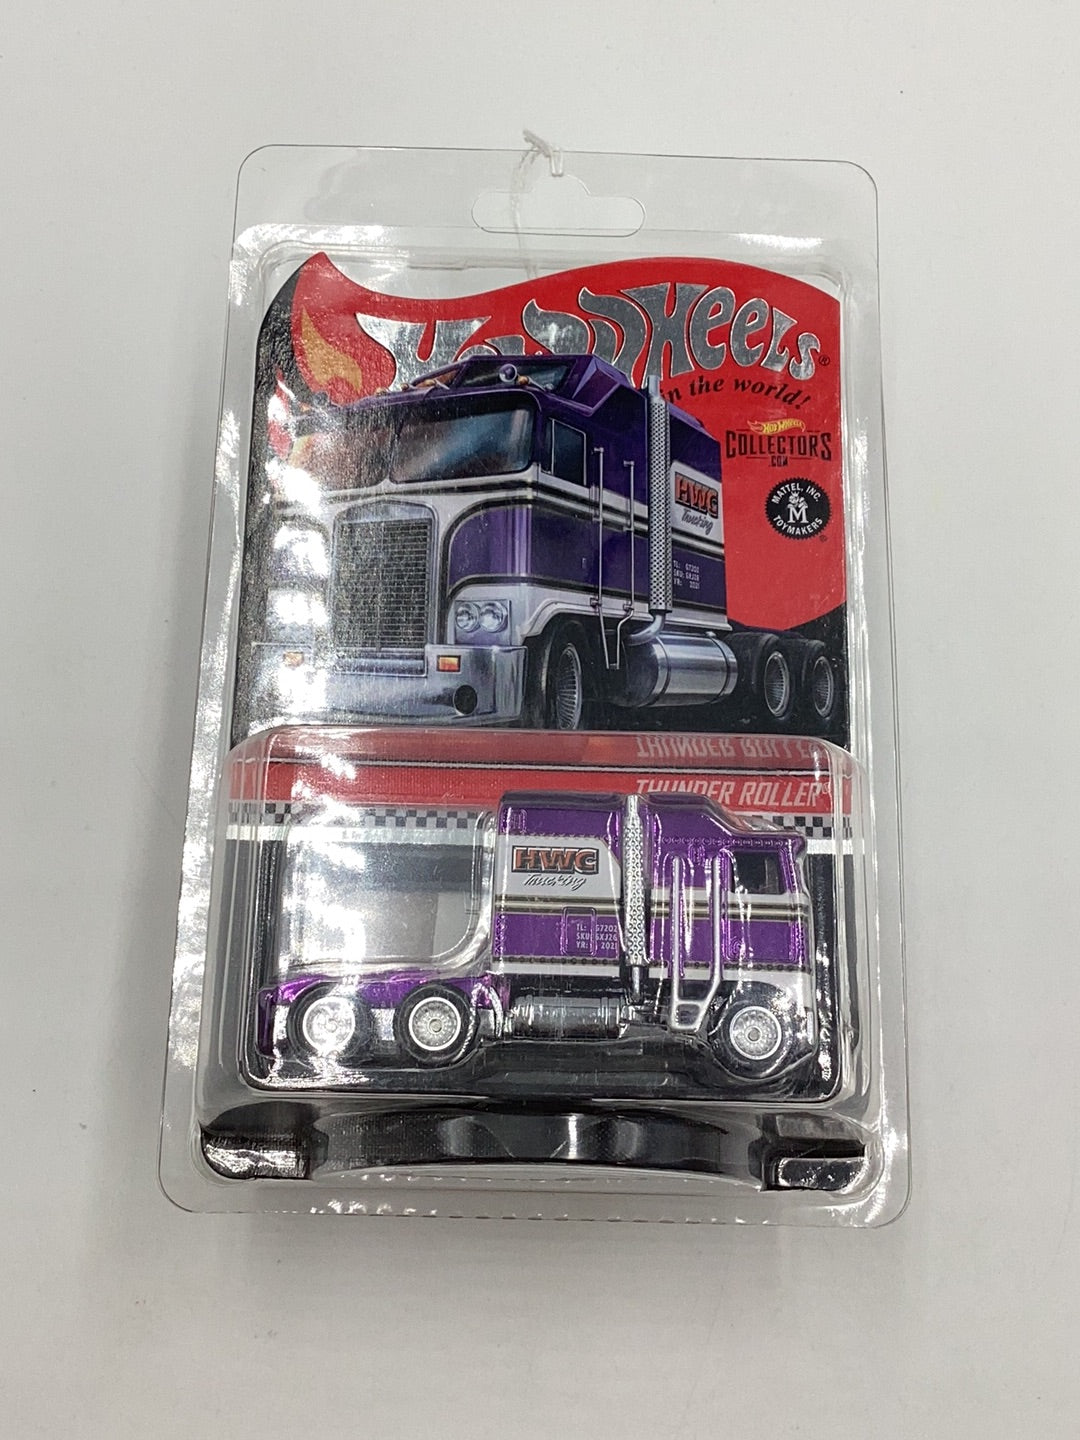 2020 Hot Wheels redline club RLC Thunder Roller Purple 9595 of 20000 with protector